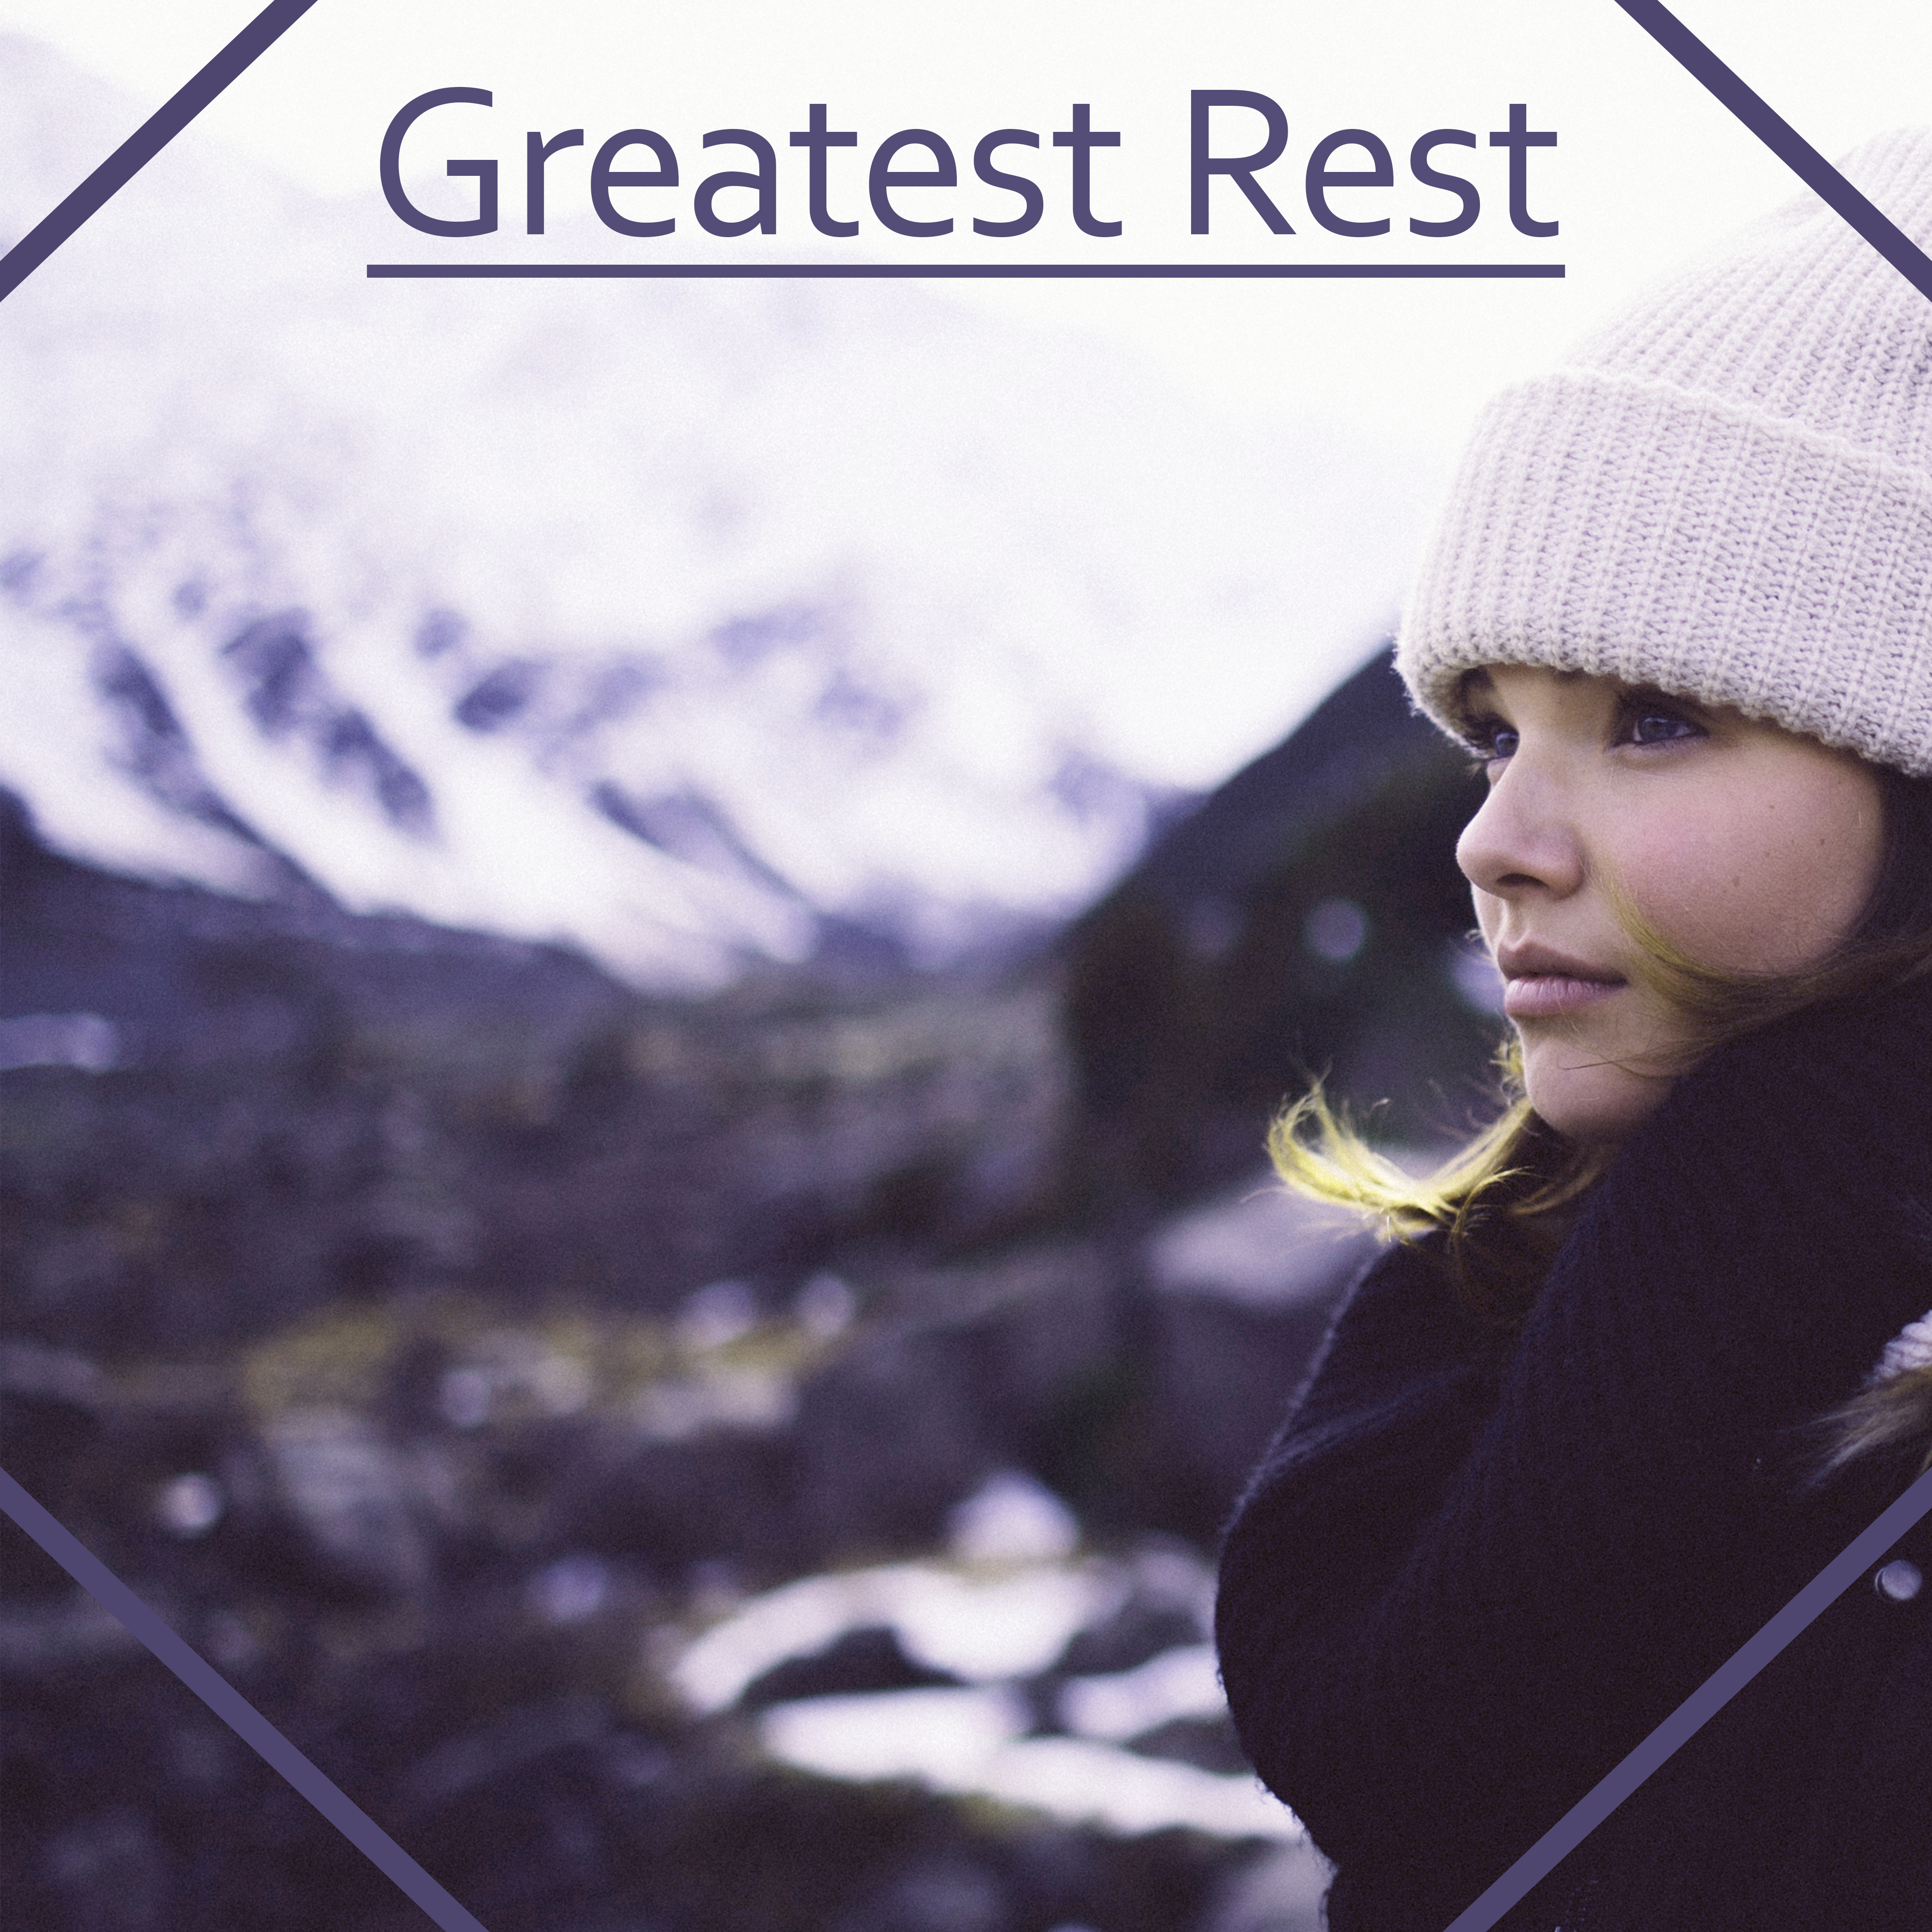 Greatest Rest - Miraculous Moments Tranquility, Time for Yourself, Full Relaxation, Hot Tea